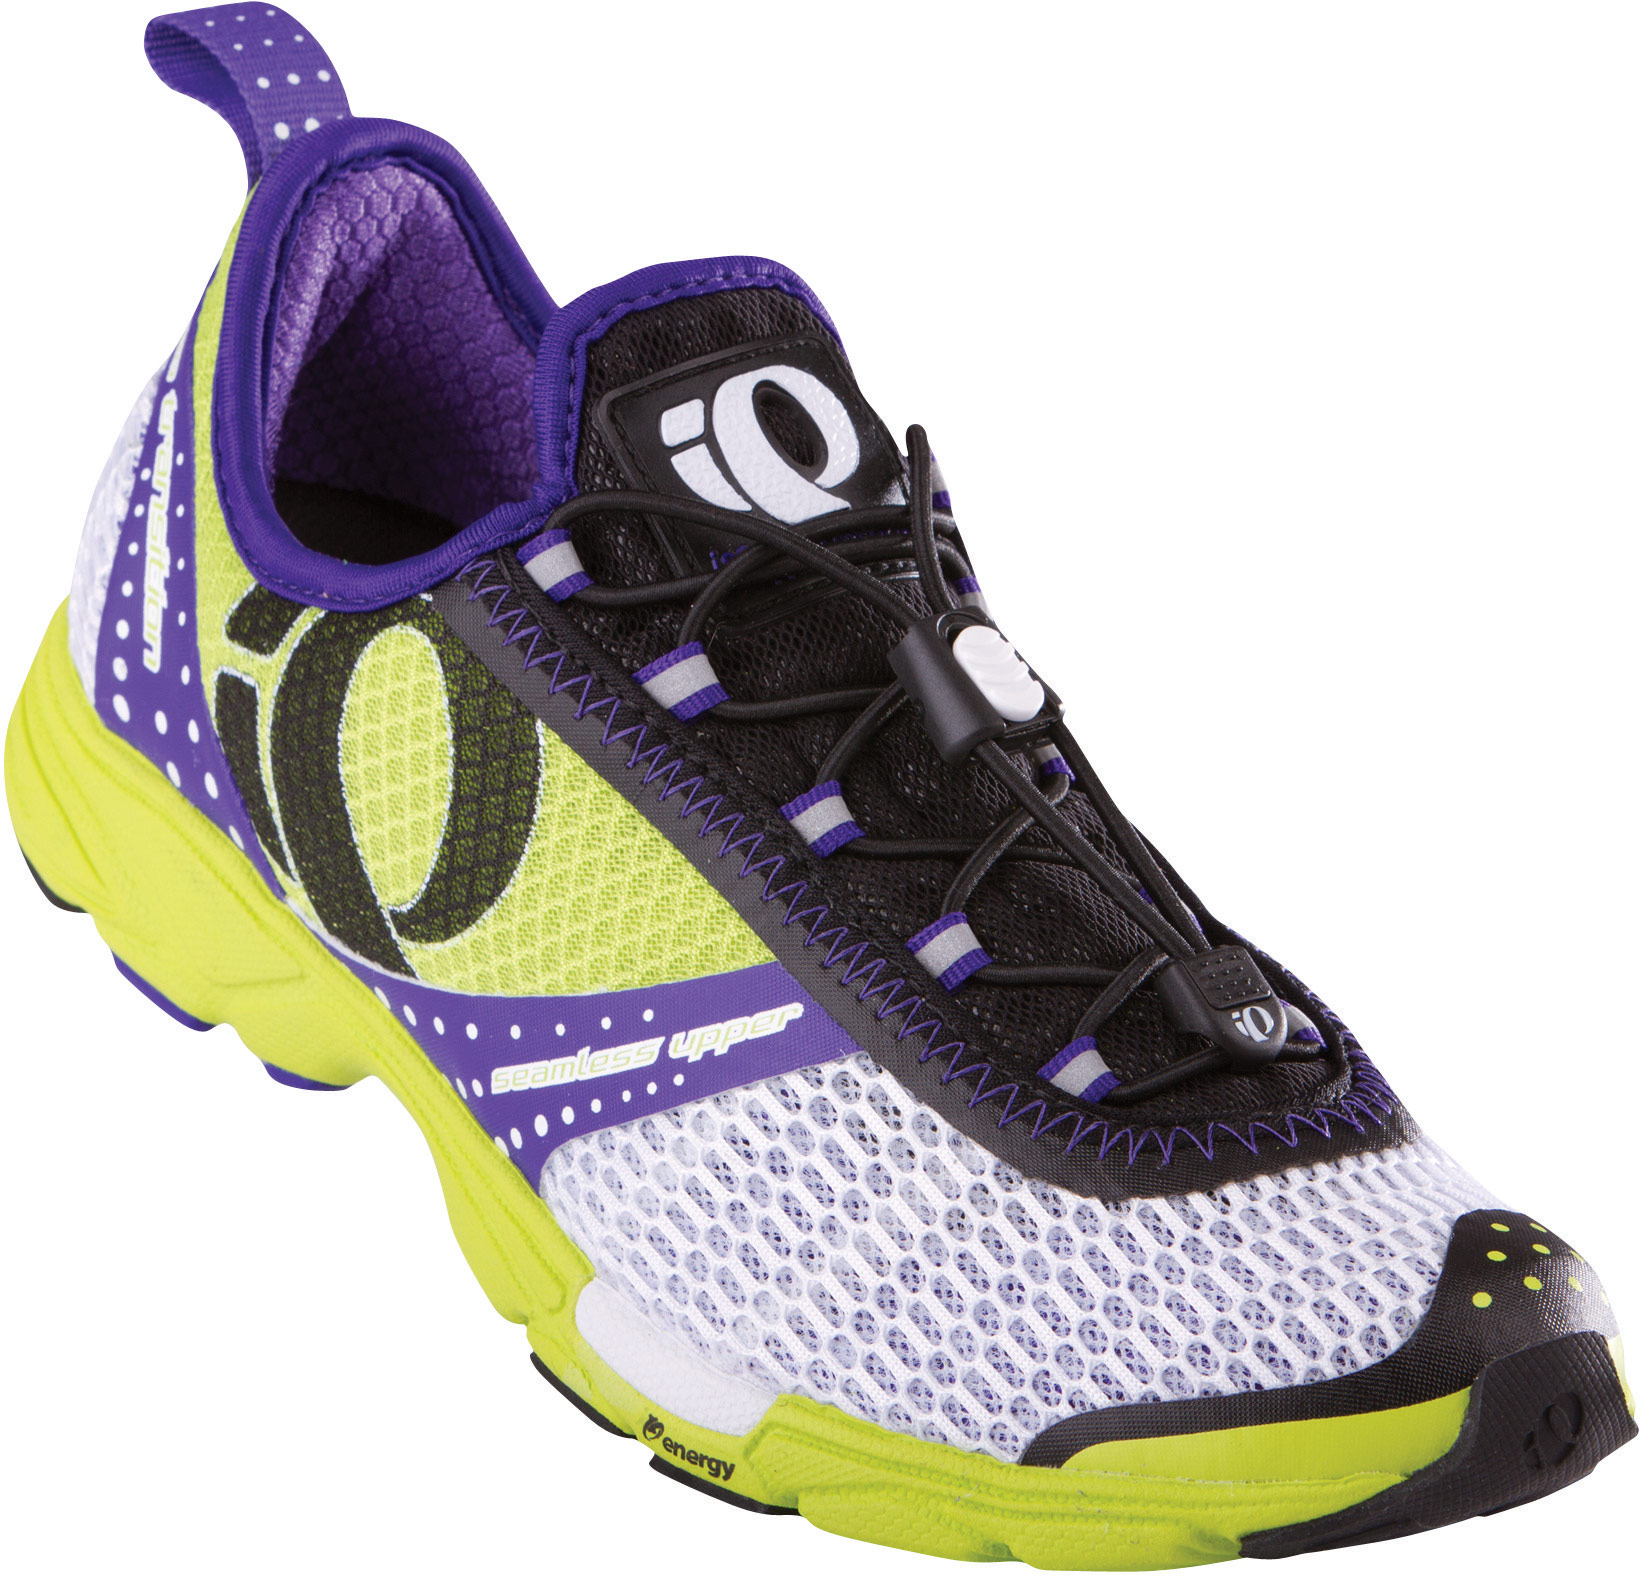 Pearl Izumi Women's isoTransition Running Shoes - Towpath Bike, Rochester  New York's Premier Bike Shop since 1971.